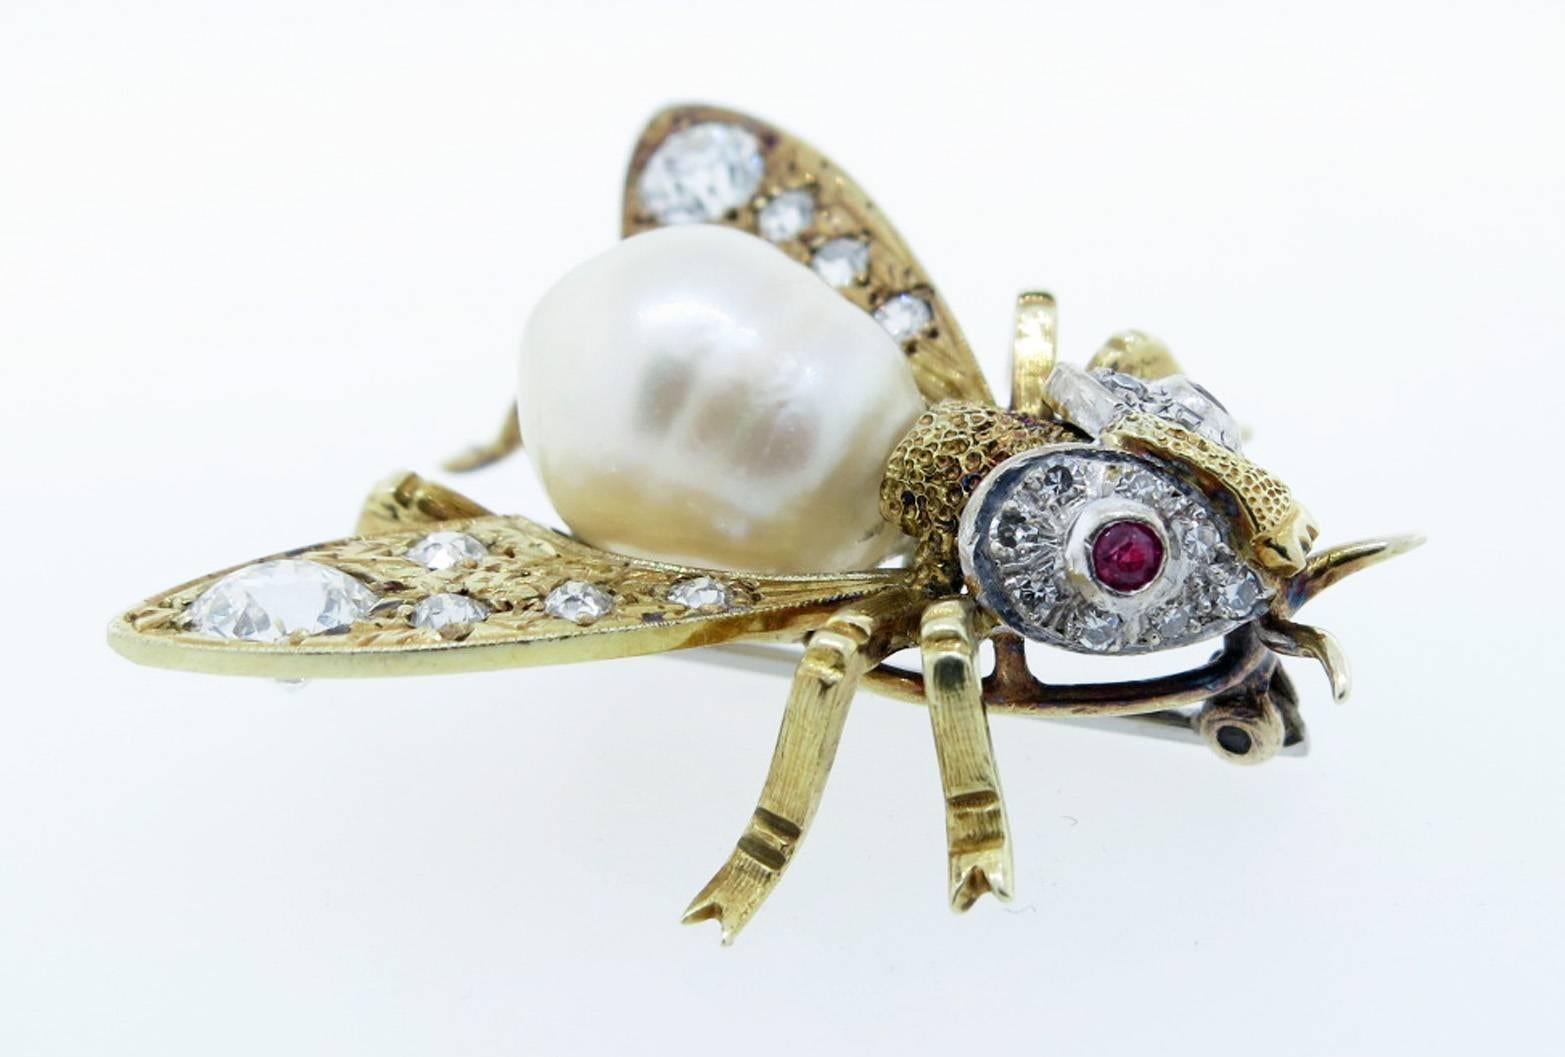 Handmade 18kt. yellow gold fly brooch measuring  1 1/4 inches in length. The baroque pearl body measures approx 10.5mm. The beautifully engraved wings and face are set with approx 1.5cts of European cut diamonds and natural ruby eyes.